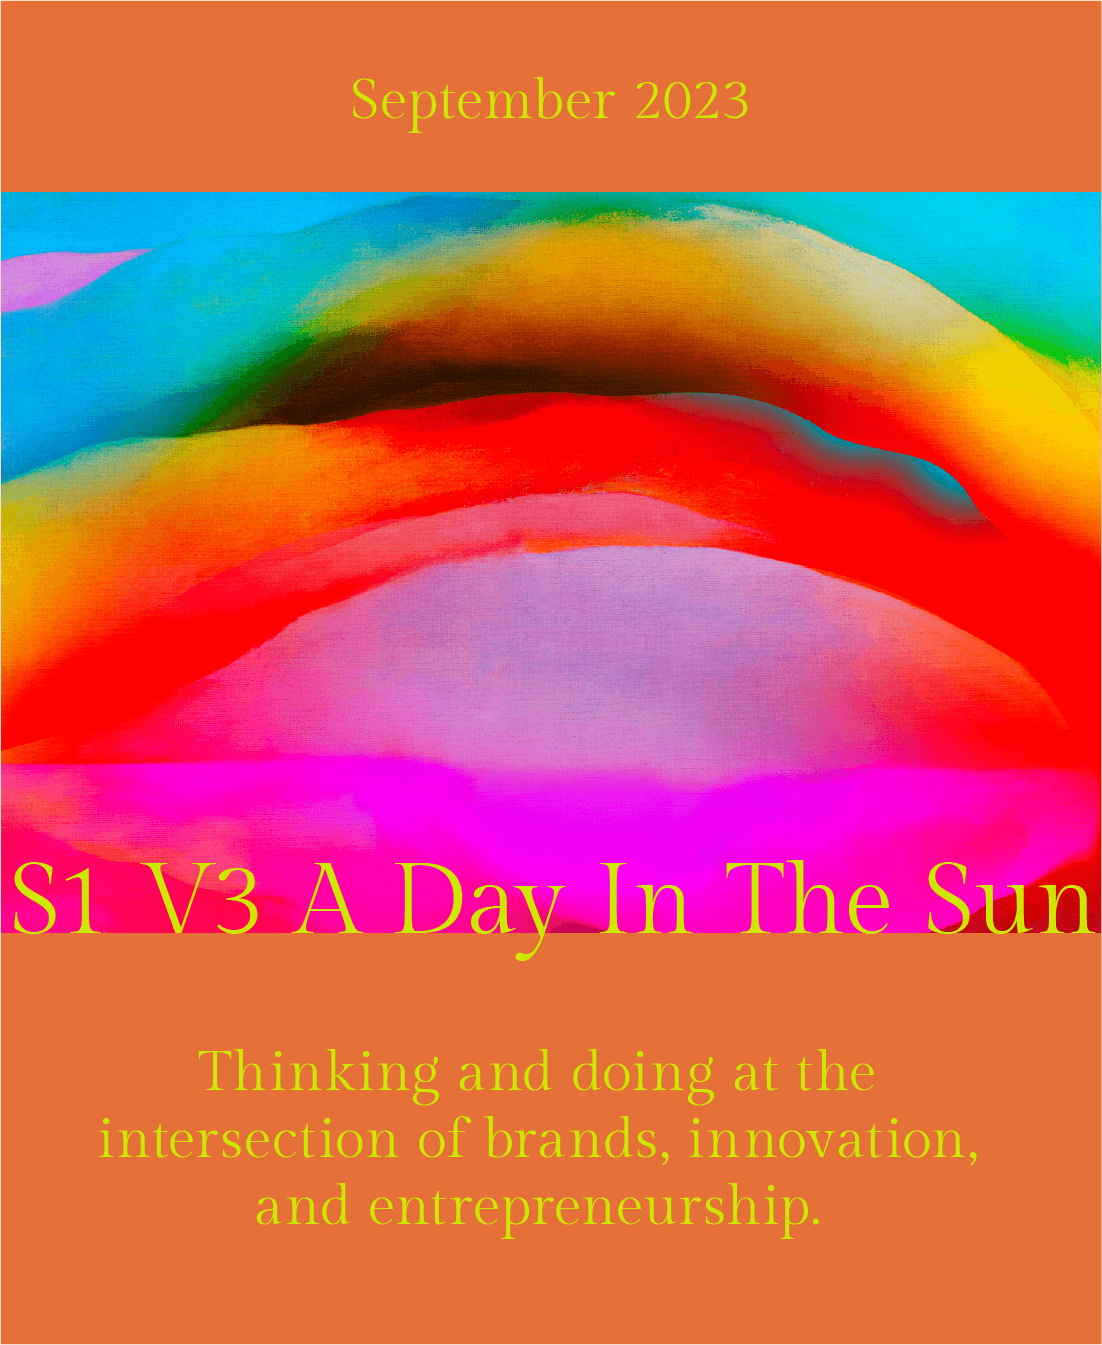 A vibrant abstract image with a fluid array of colors, blending hues of orange, blue, green, red, and pink, reminiscent of a colorful horizon at sunset. At the top, in a contrasting bold font, the text reads 'September 2023'. Below the colorful design, centered text states 'S1 V3 A Day In The Sun', suggesting it is the third version of a series or publication. Further text below the title provides a description 'Thinking and doing at the intersection of brands, innovation, and entrepreneurship.' The text colors range from peach to orange, complementing the warm tones of the artwork.